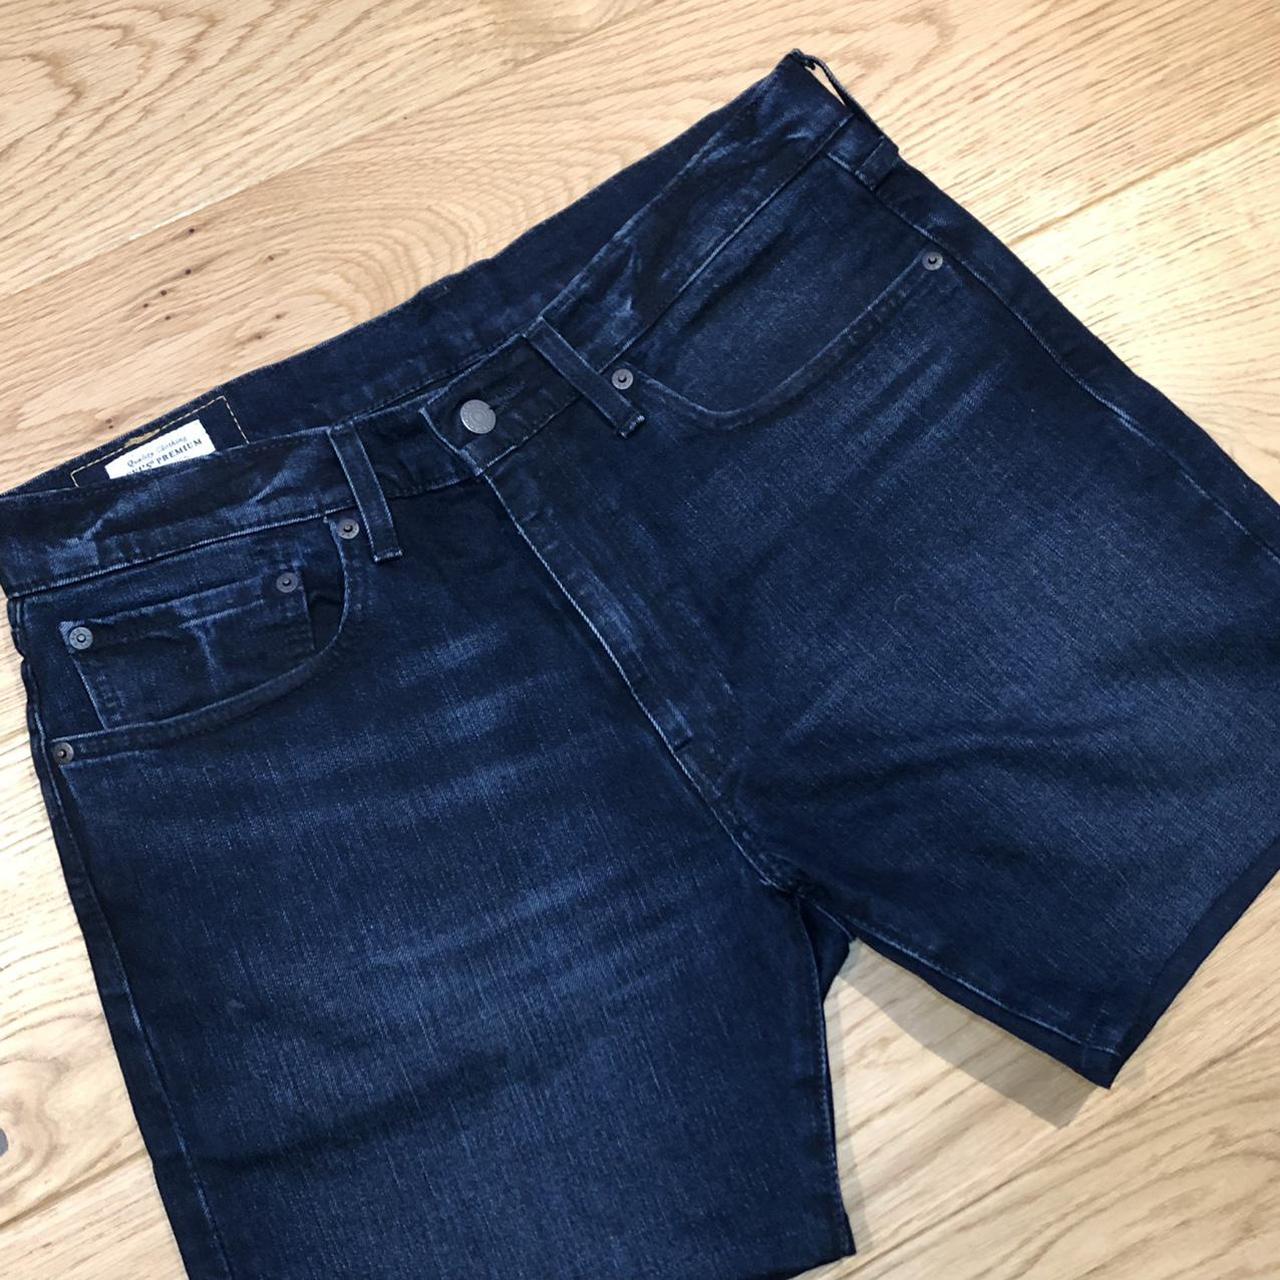 Levi's Men's Navy and Blue Shorts (4)